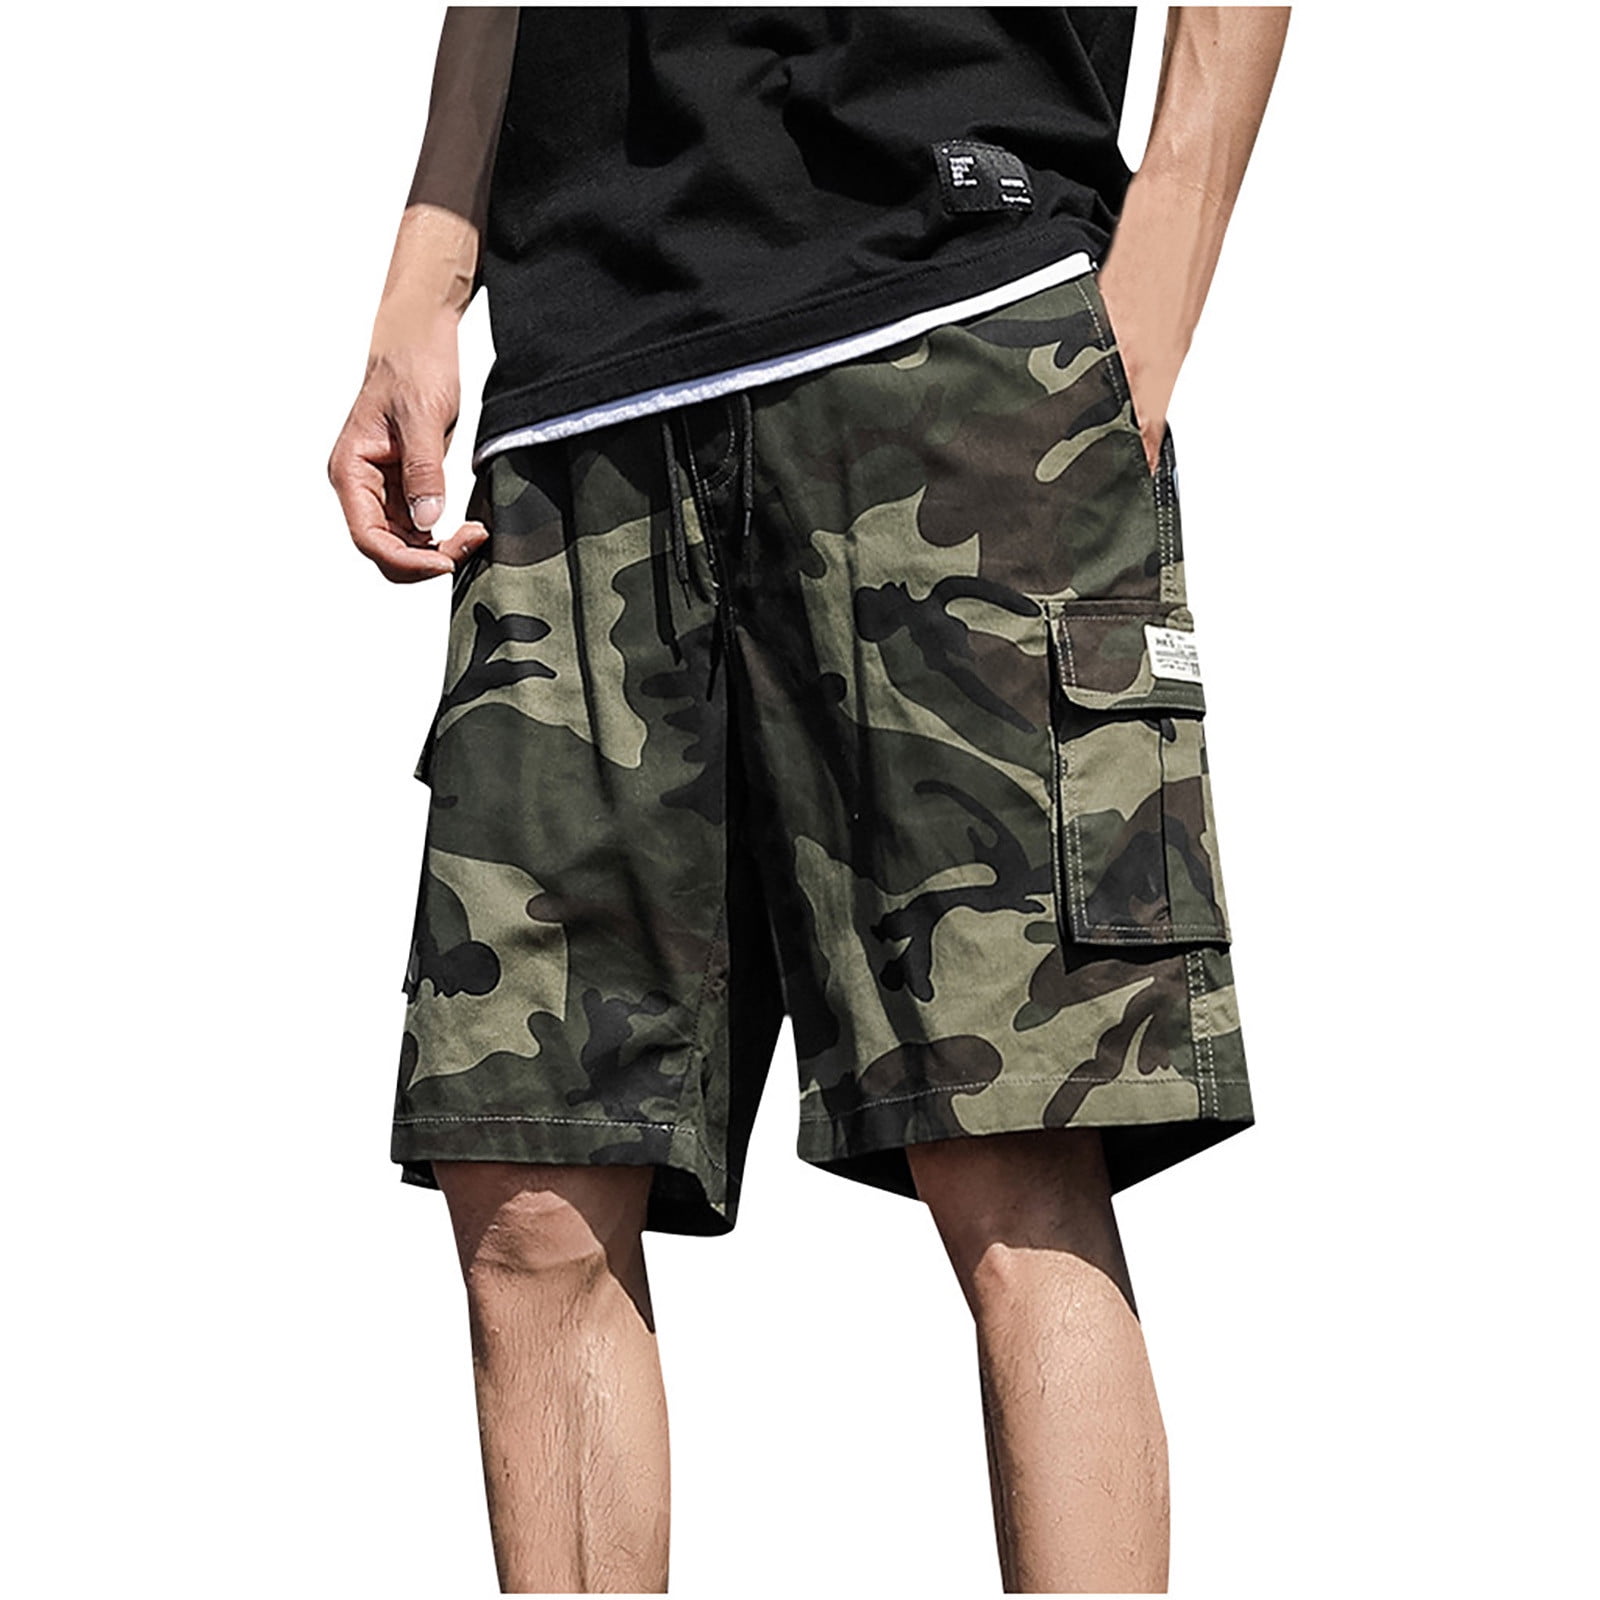 YYDGH On Clearance Men's Camouflage Cargo Shorts Elastic Waist Relaxed Fit  Cotton Casual Outdoor Lightweight Work Shorts with Multi Pockets(Army  Green,M) 